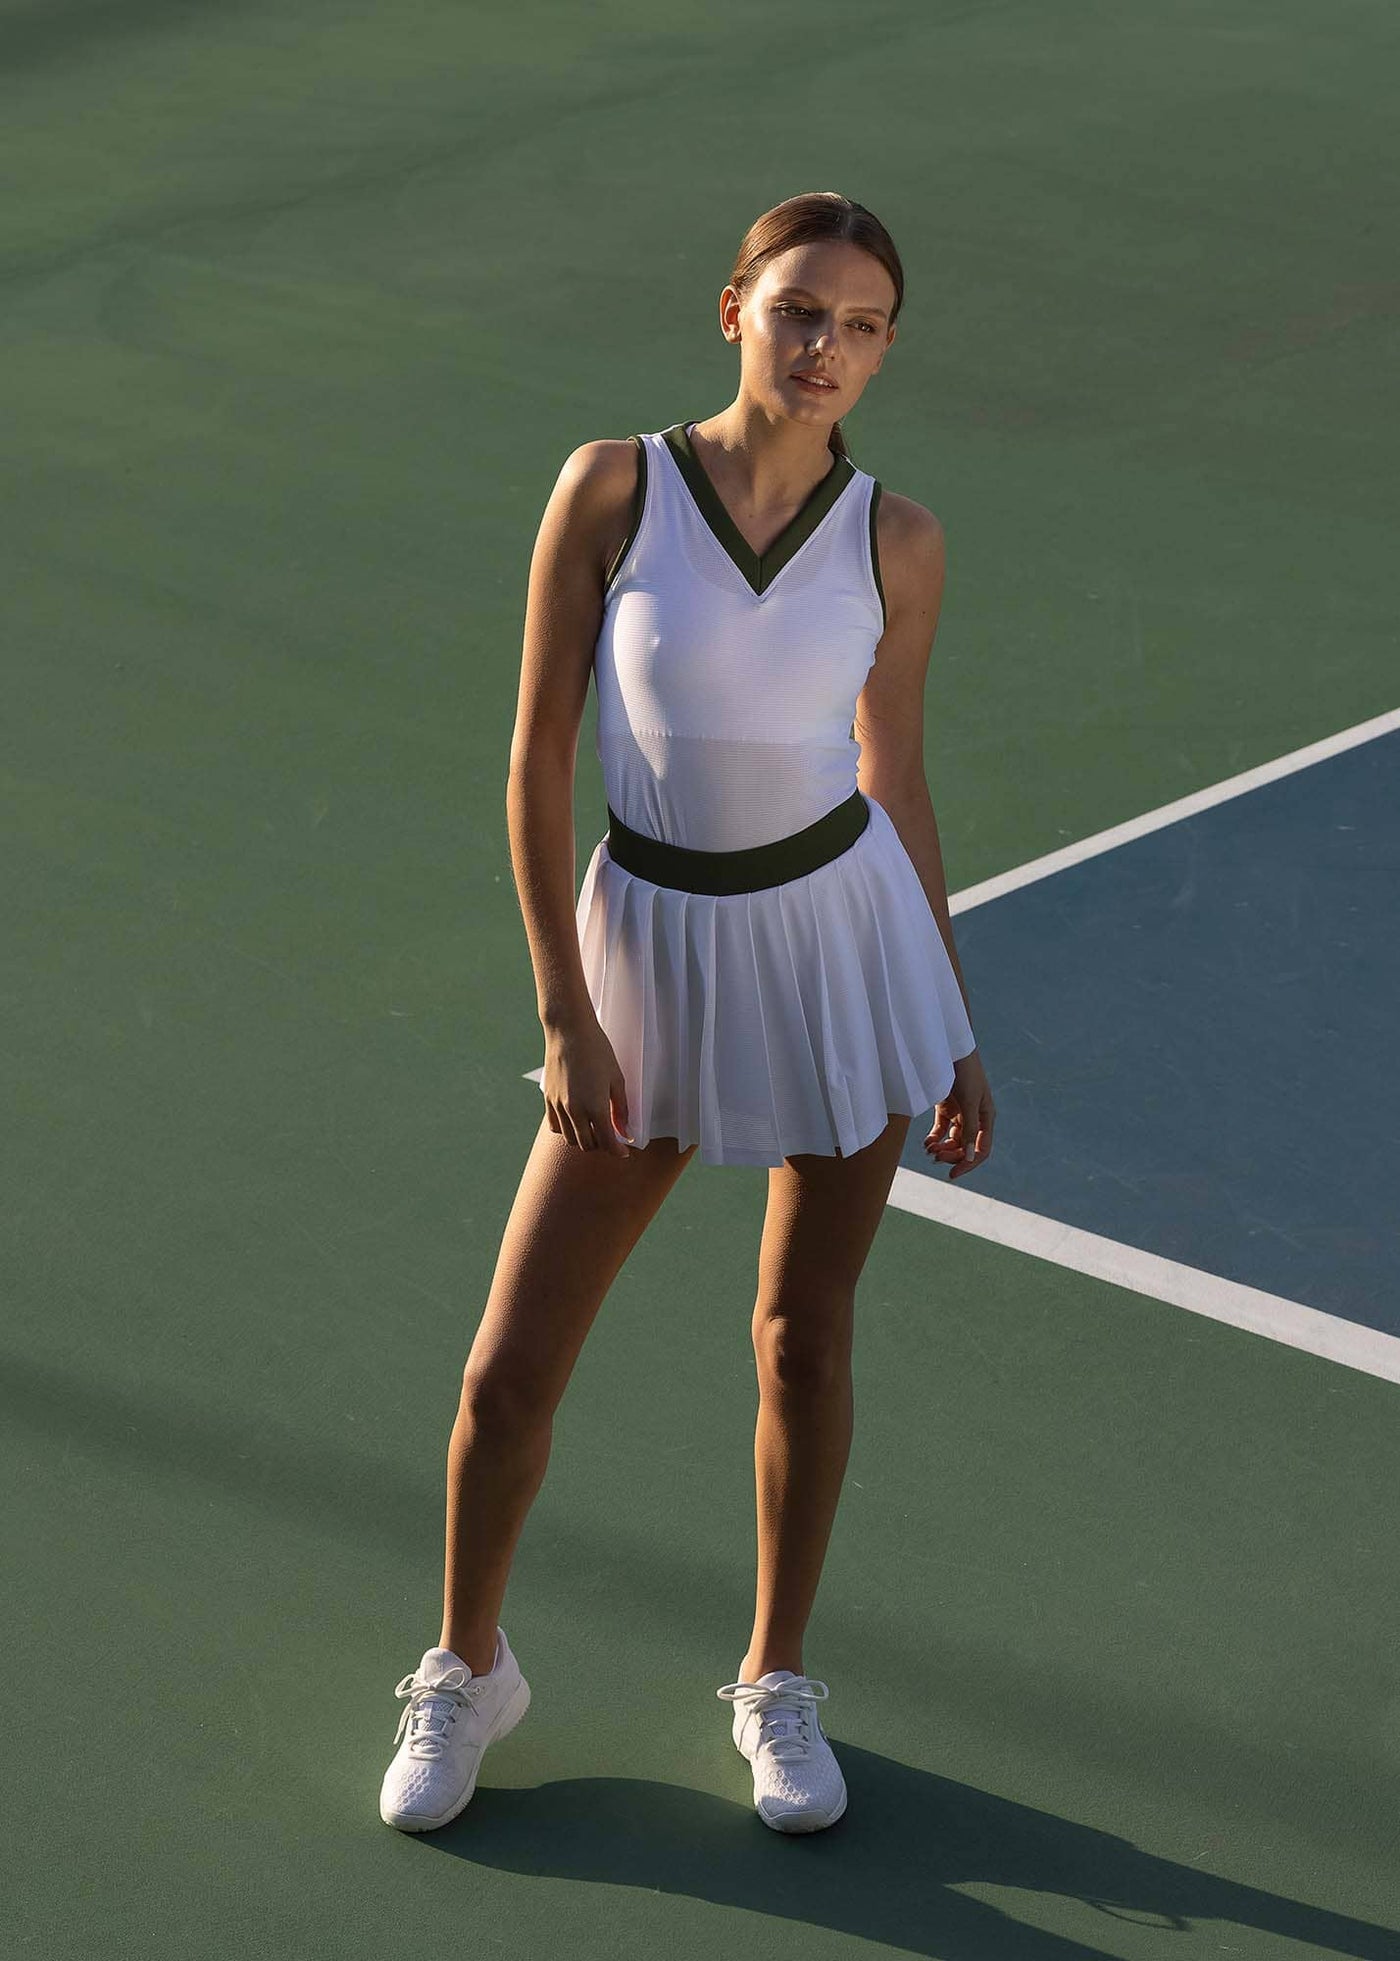 Women's tennis tank top named after Kim Clijsters